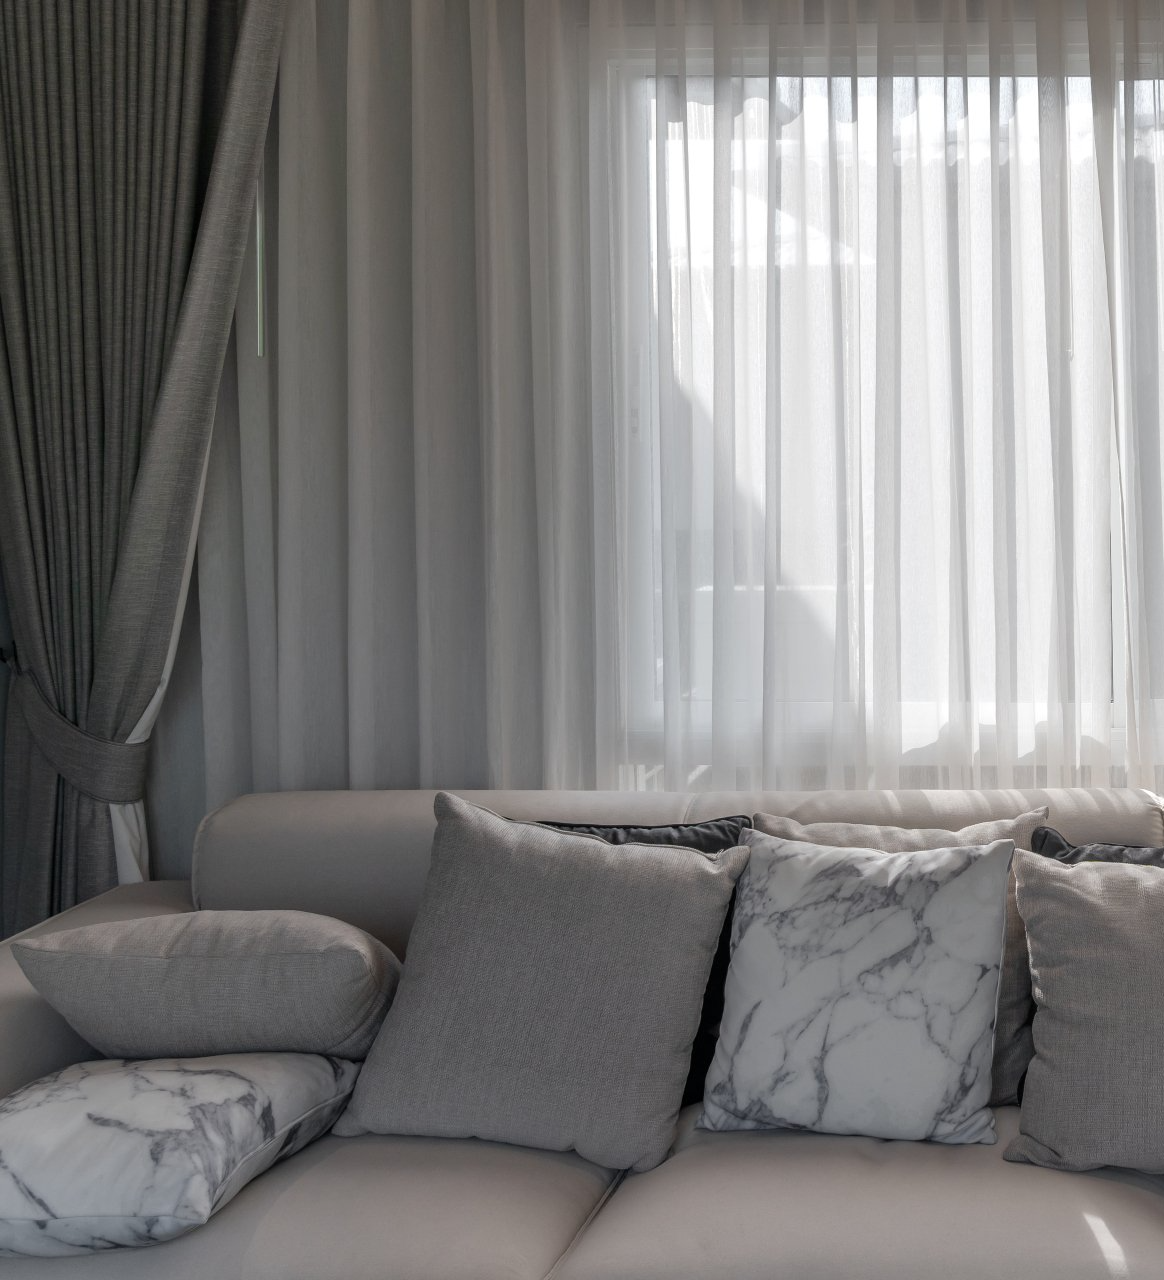 Grey couch with cushions in front of window covered with sheers curtains, framed by tied back gray block-out curtains.